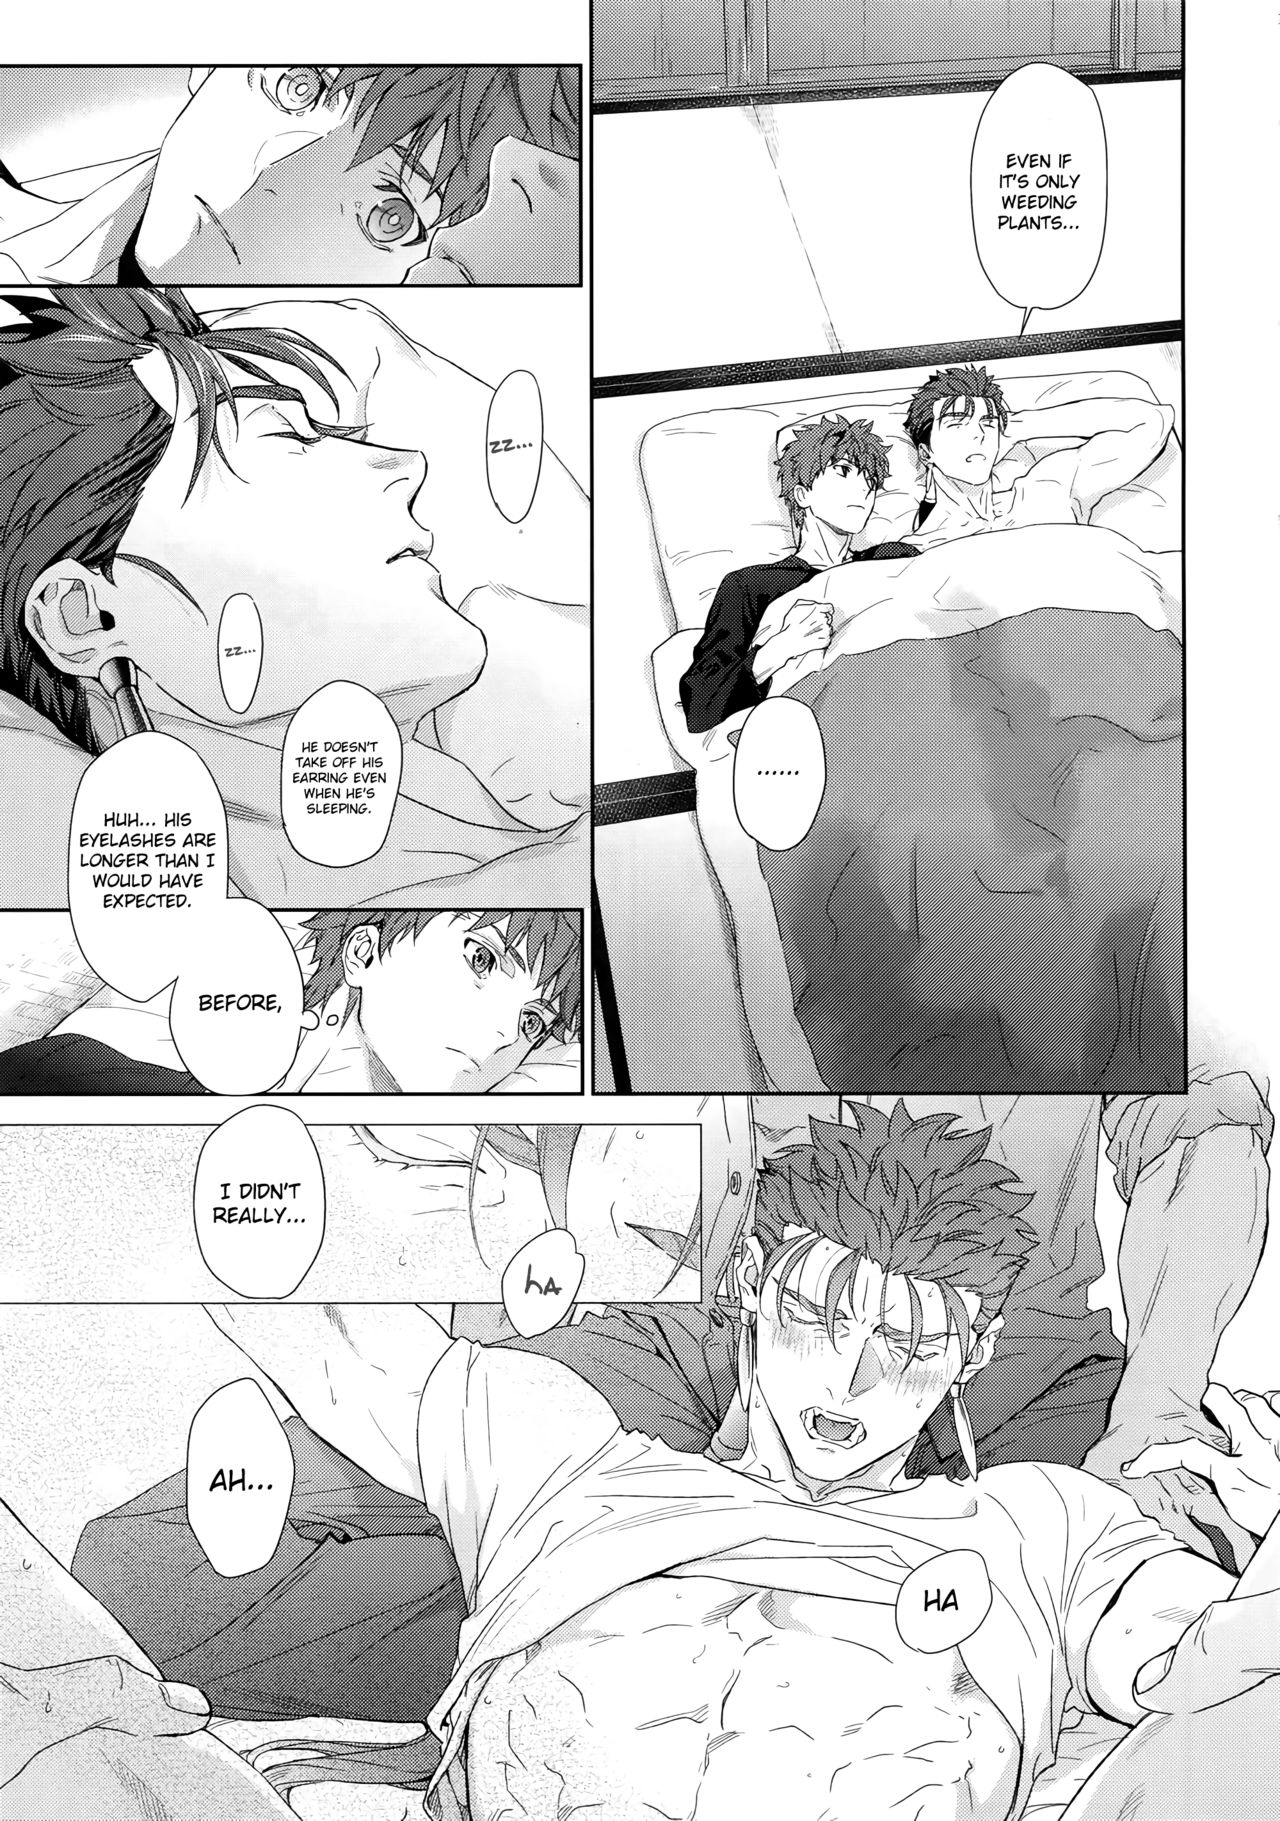 (Dai 23-ji ROOT4to5) [RED (koi)] Melange (Fate/stay night) [English] {GrapeJellyScans} [Decensored] page 14 full